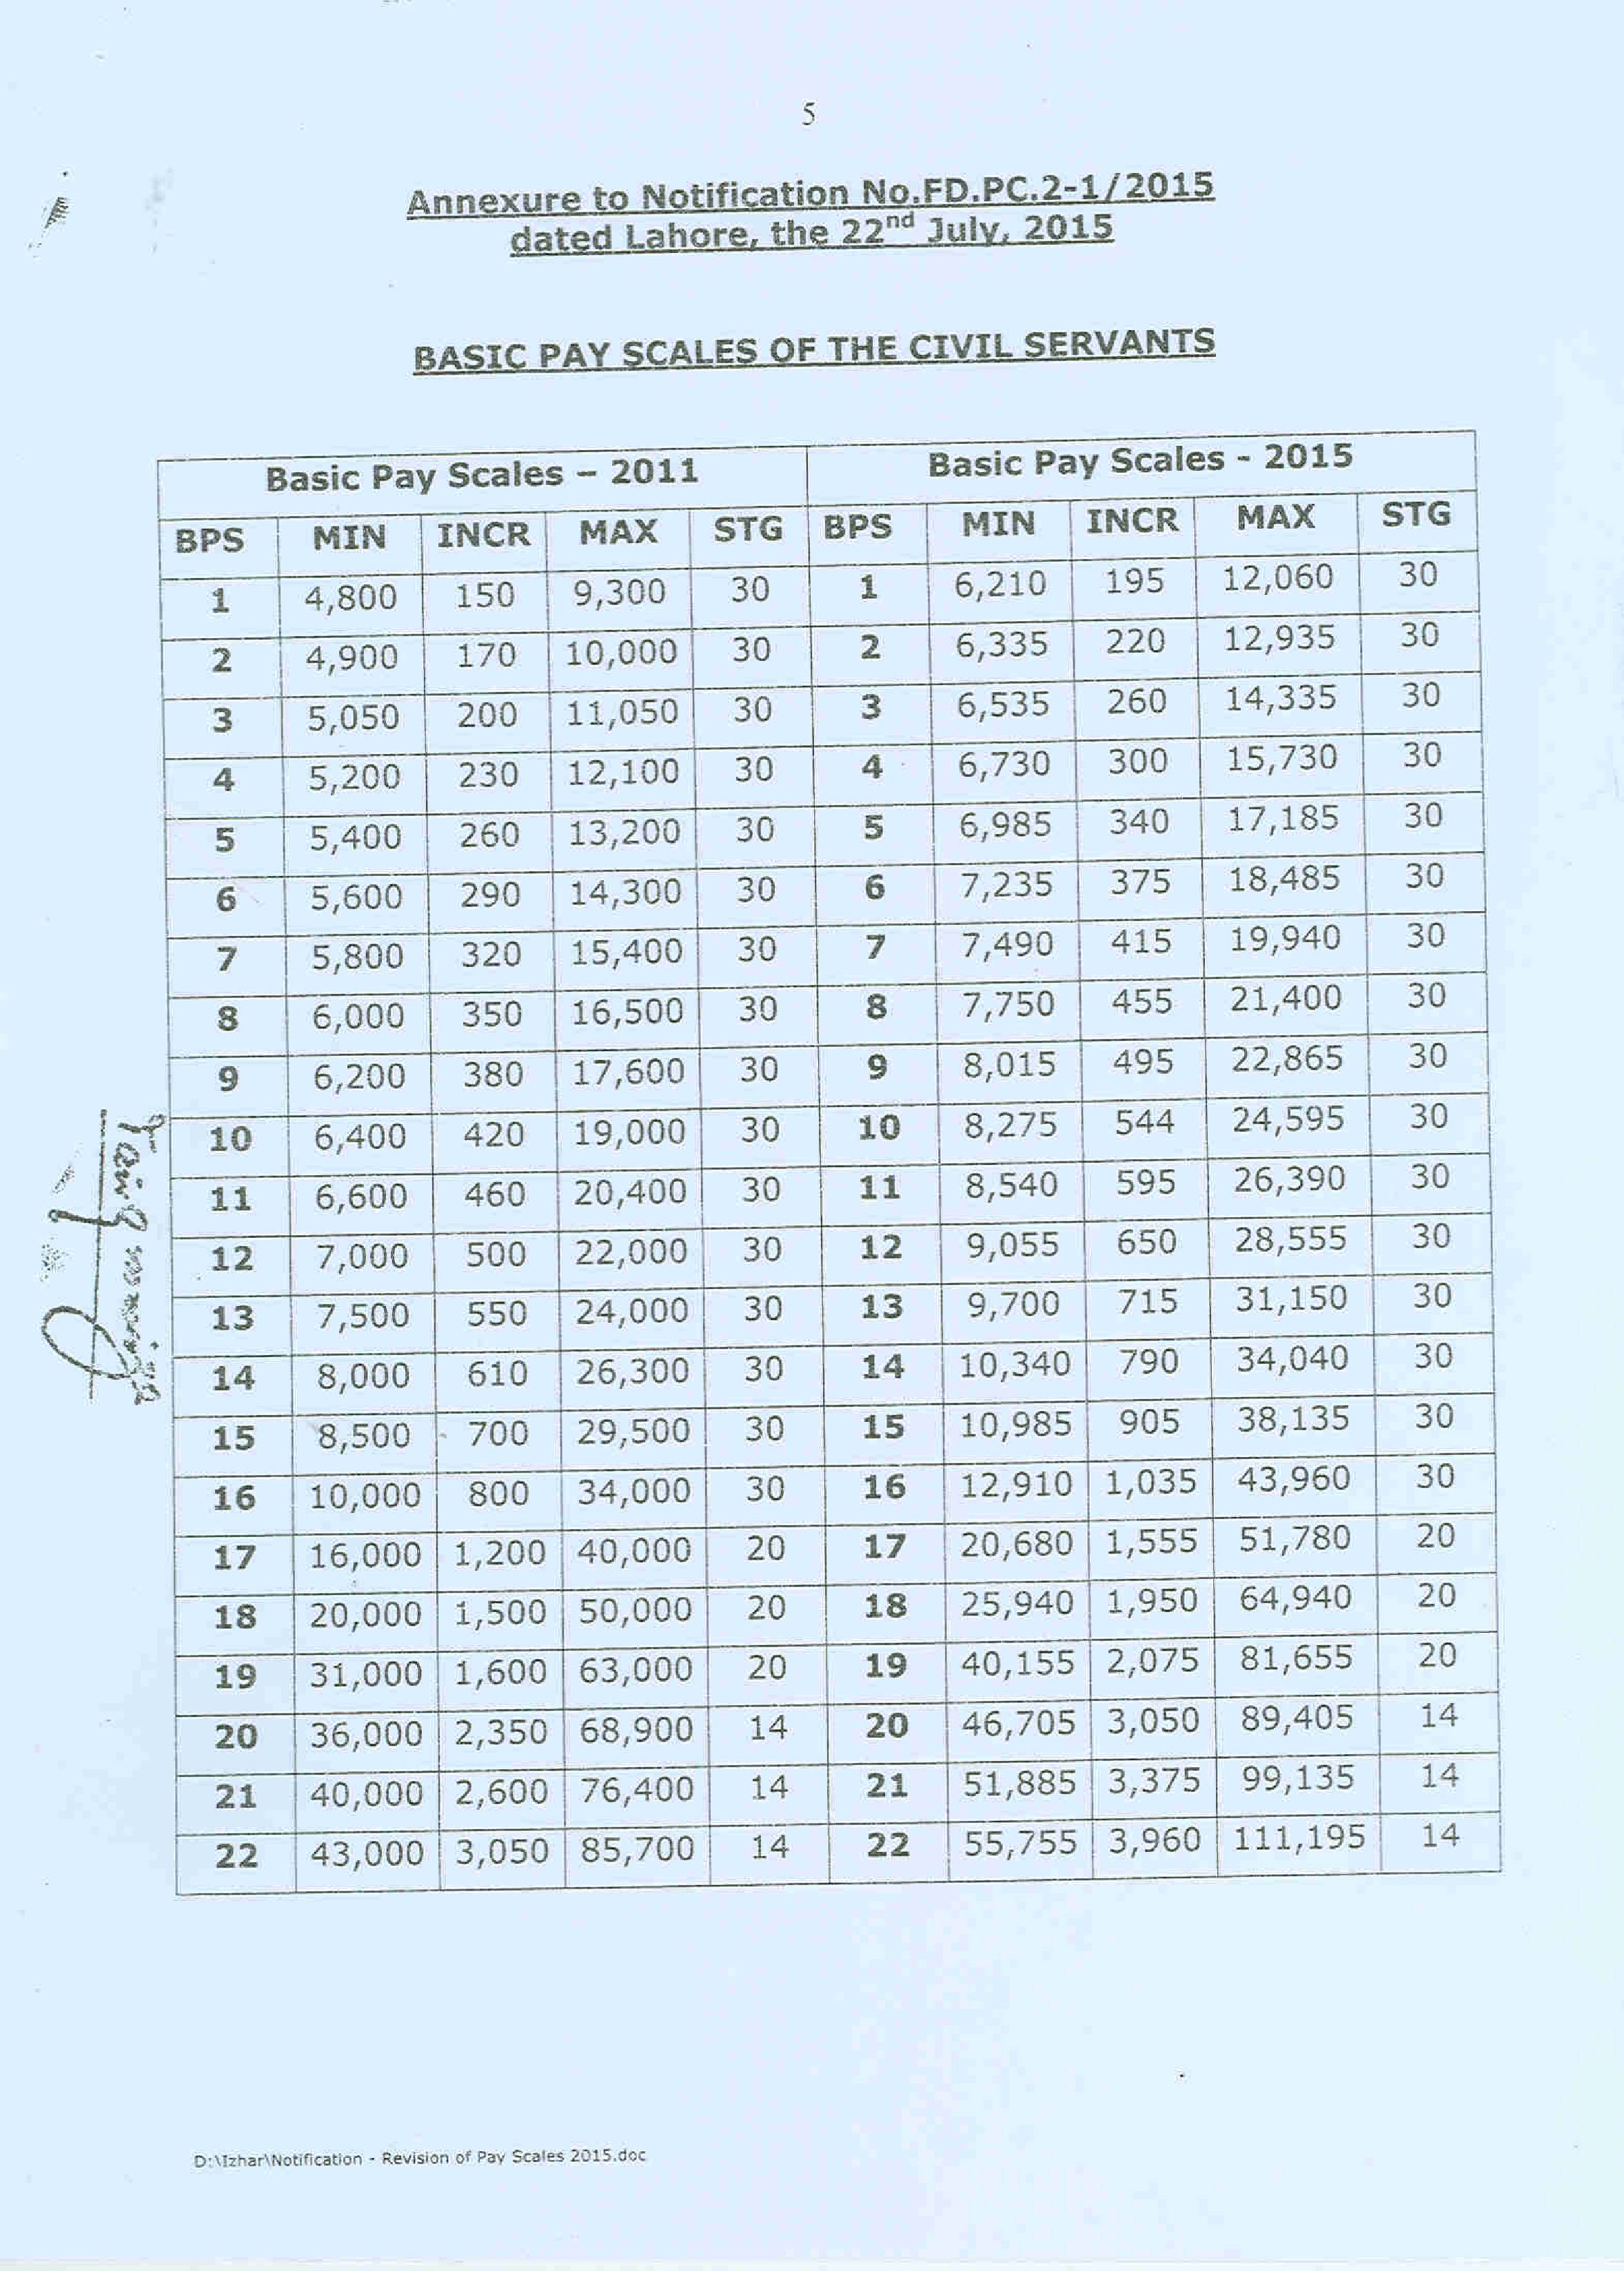 REVISION OF BASIC PAY SCALES and ALLOWANCES OF CIVIL SERVANTS OF THE PUNJAB GOVERNMENT (2015)